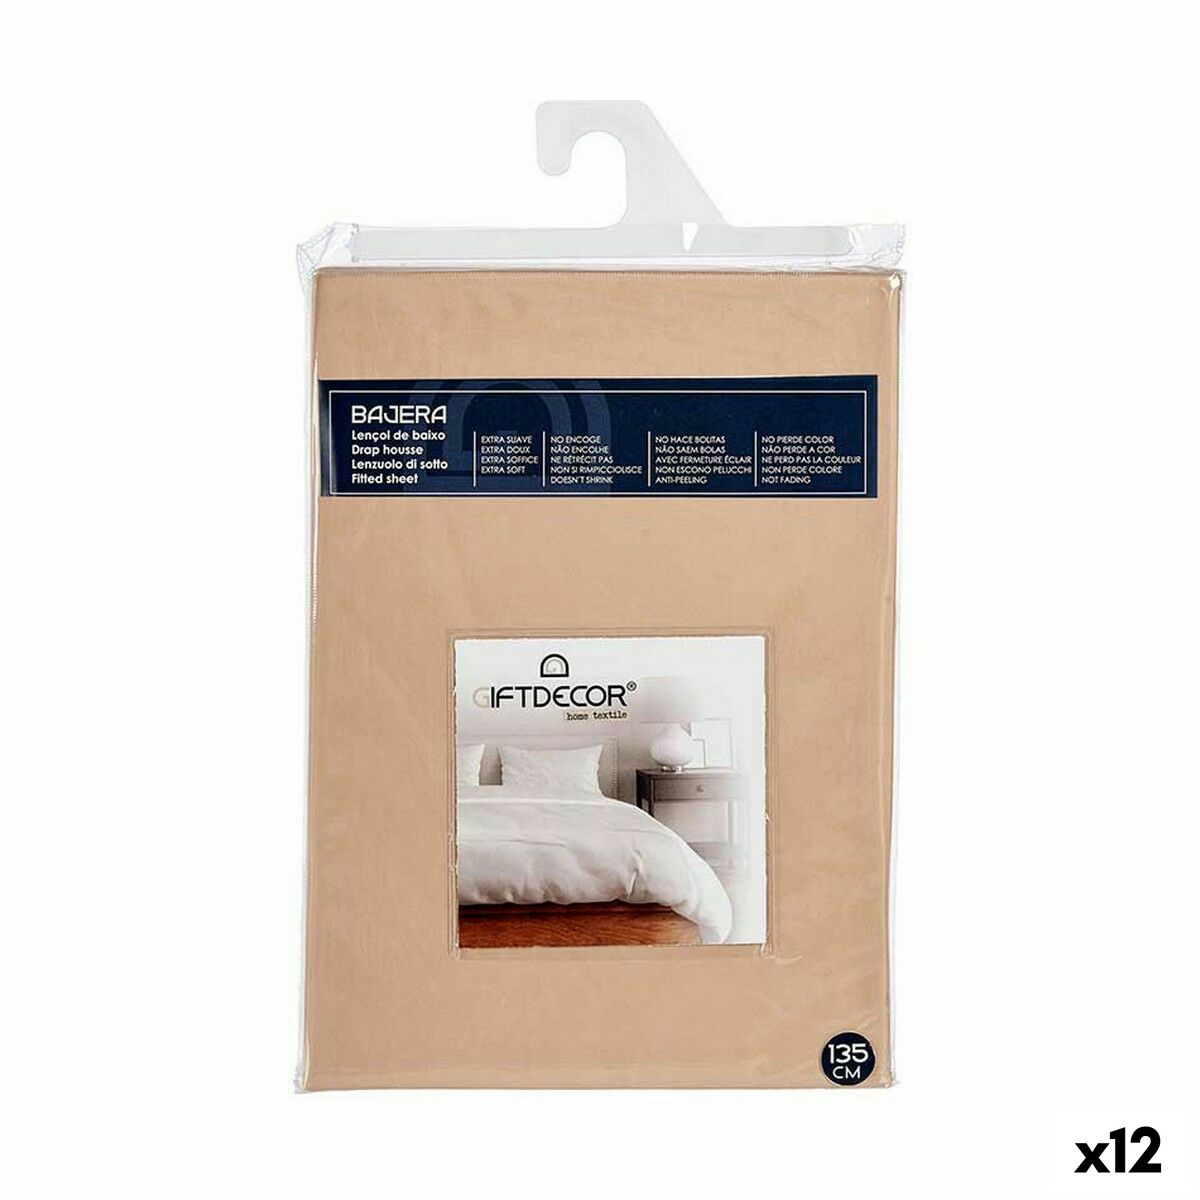 Fitted sheet 135 cm Beige (12 Units)